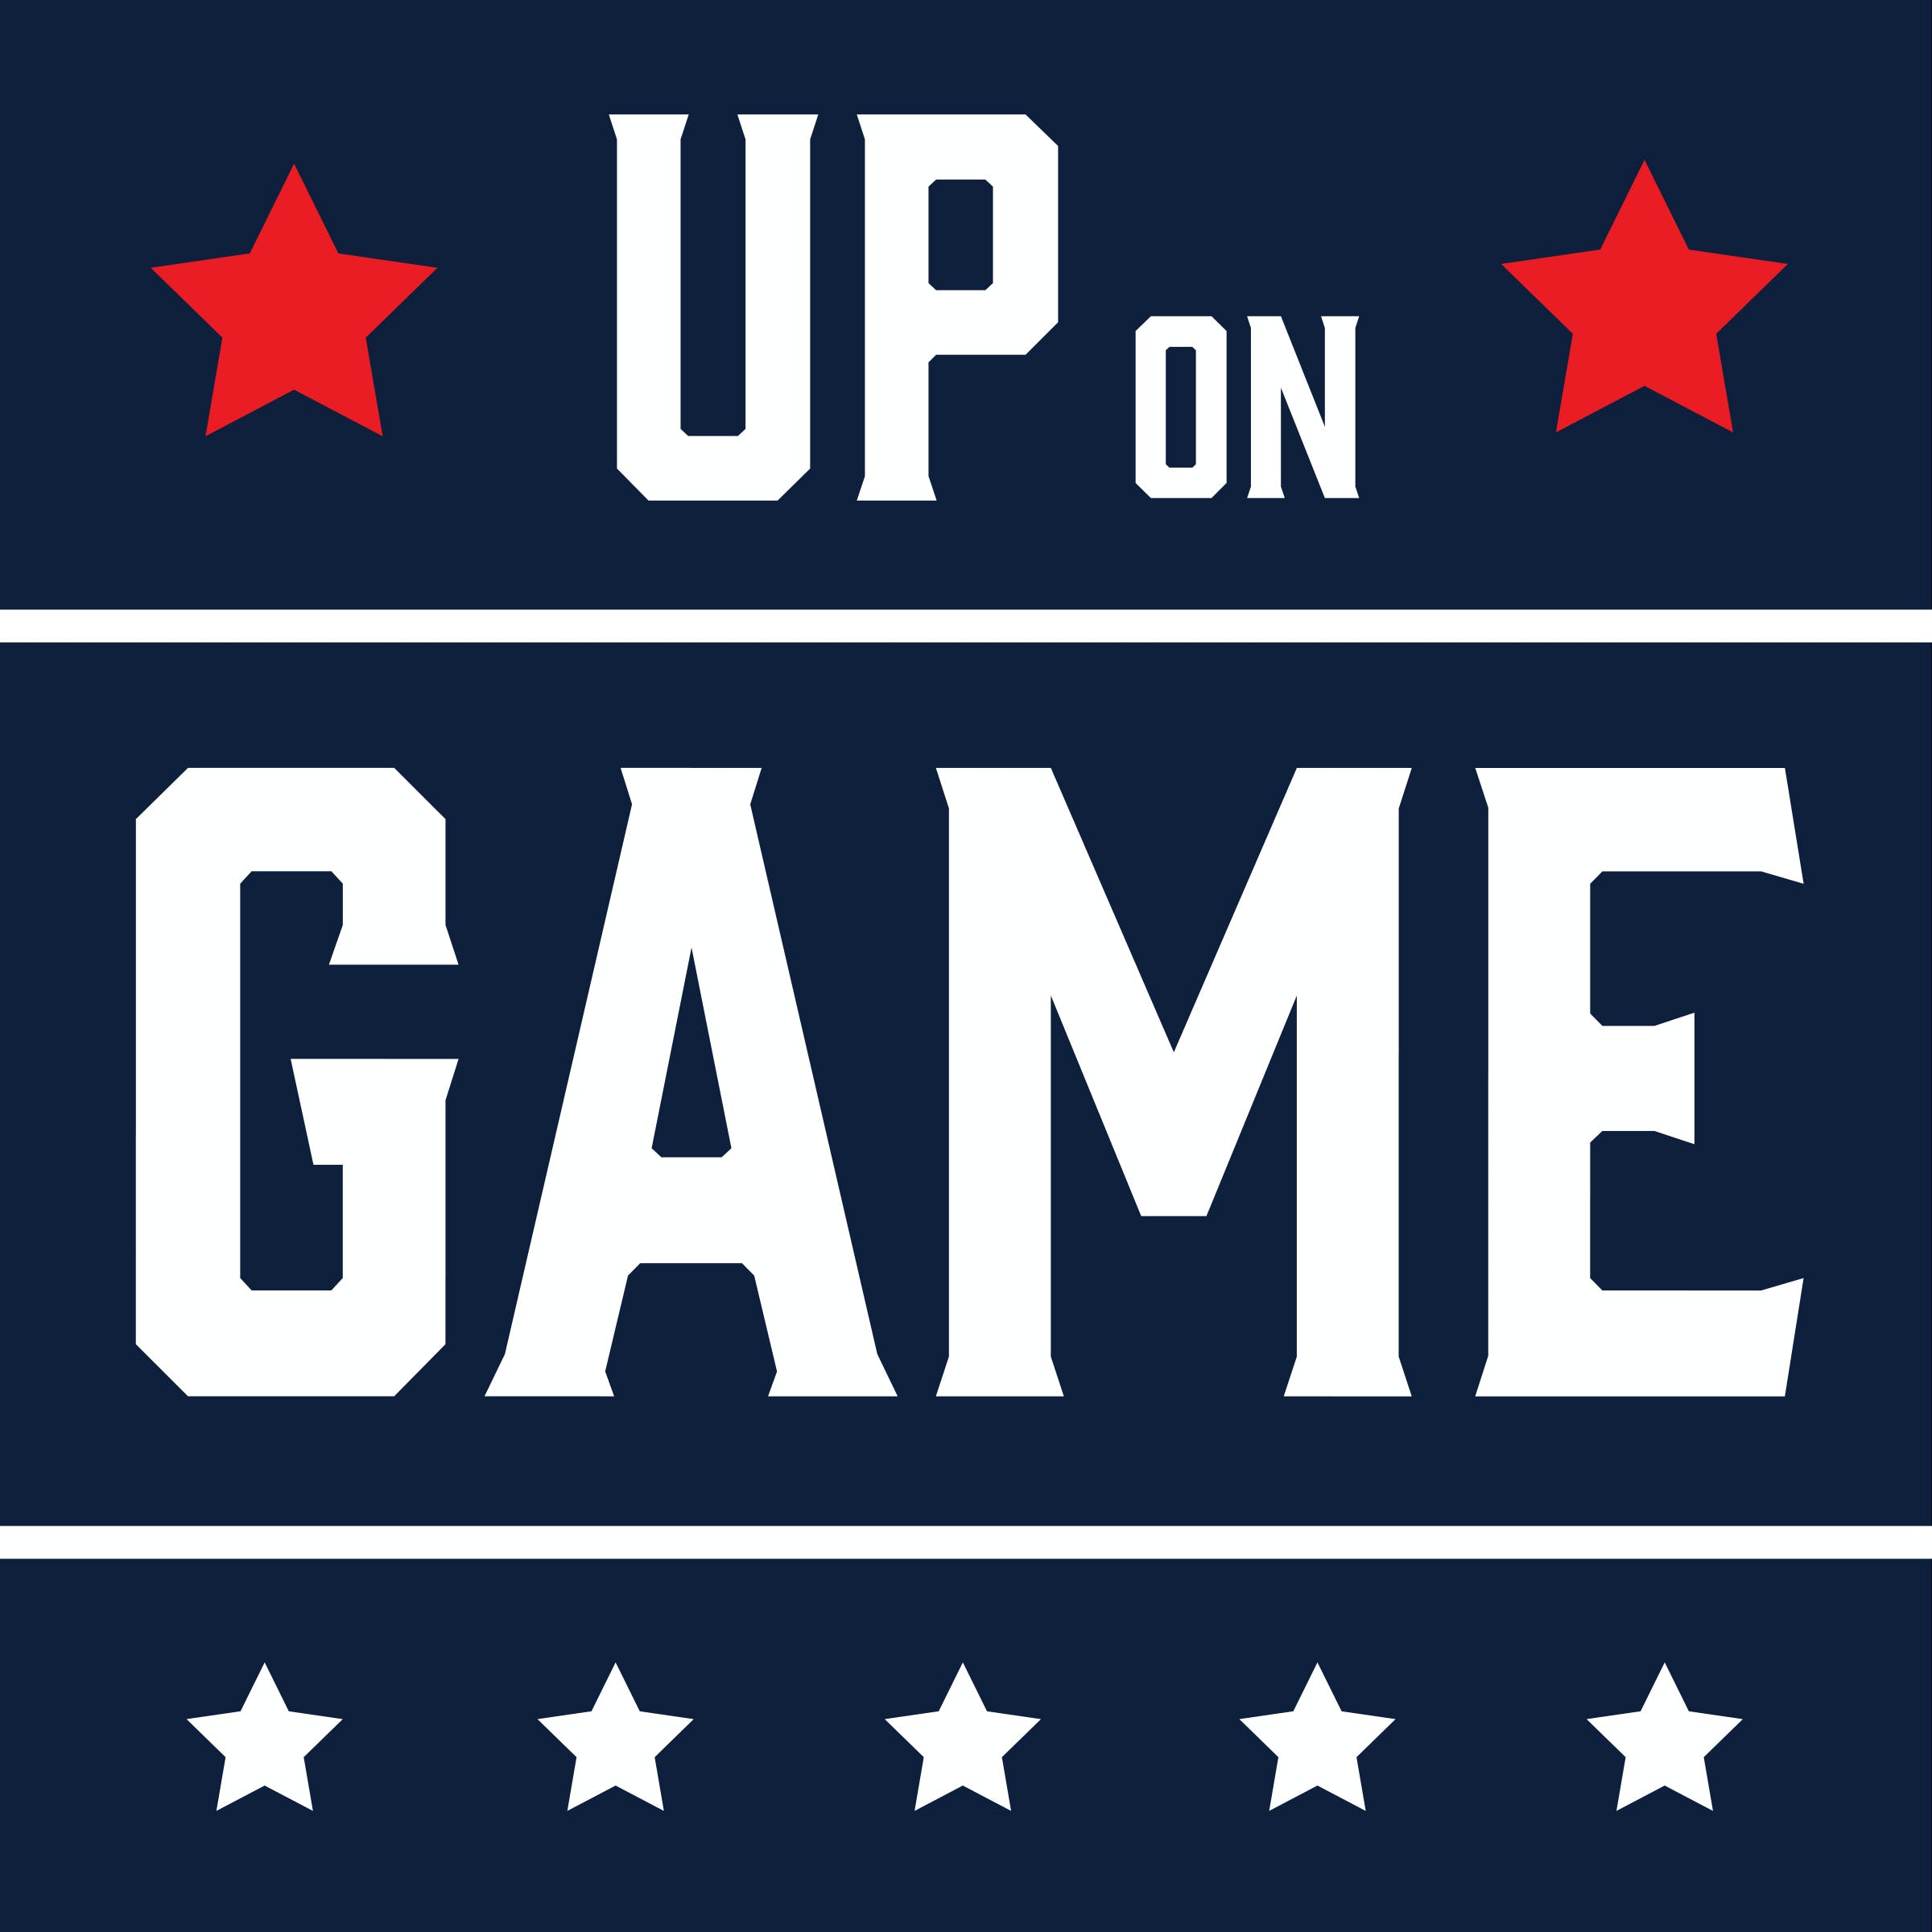 Up on Game: Hour 2 – Injured QBs, Cuffs the Legend, and more!